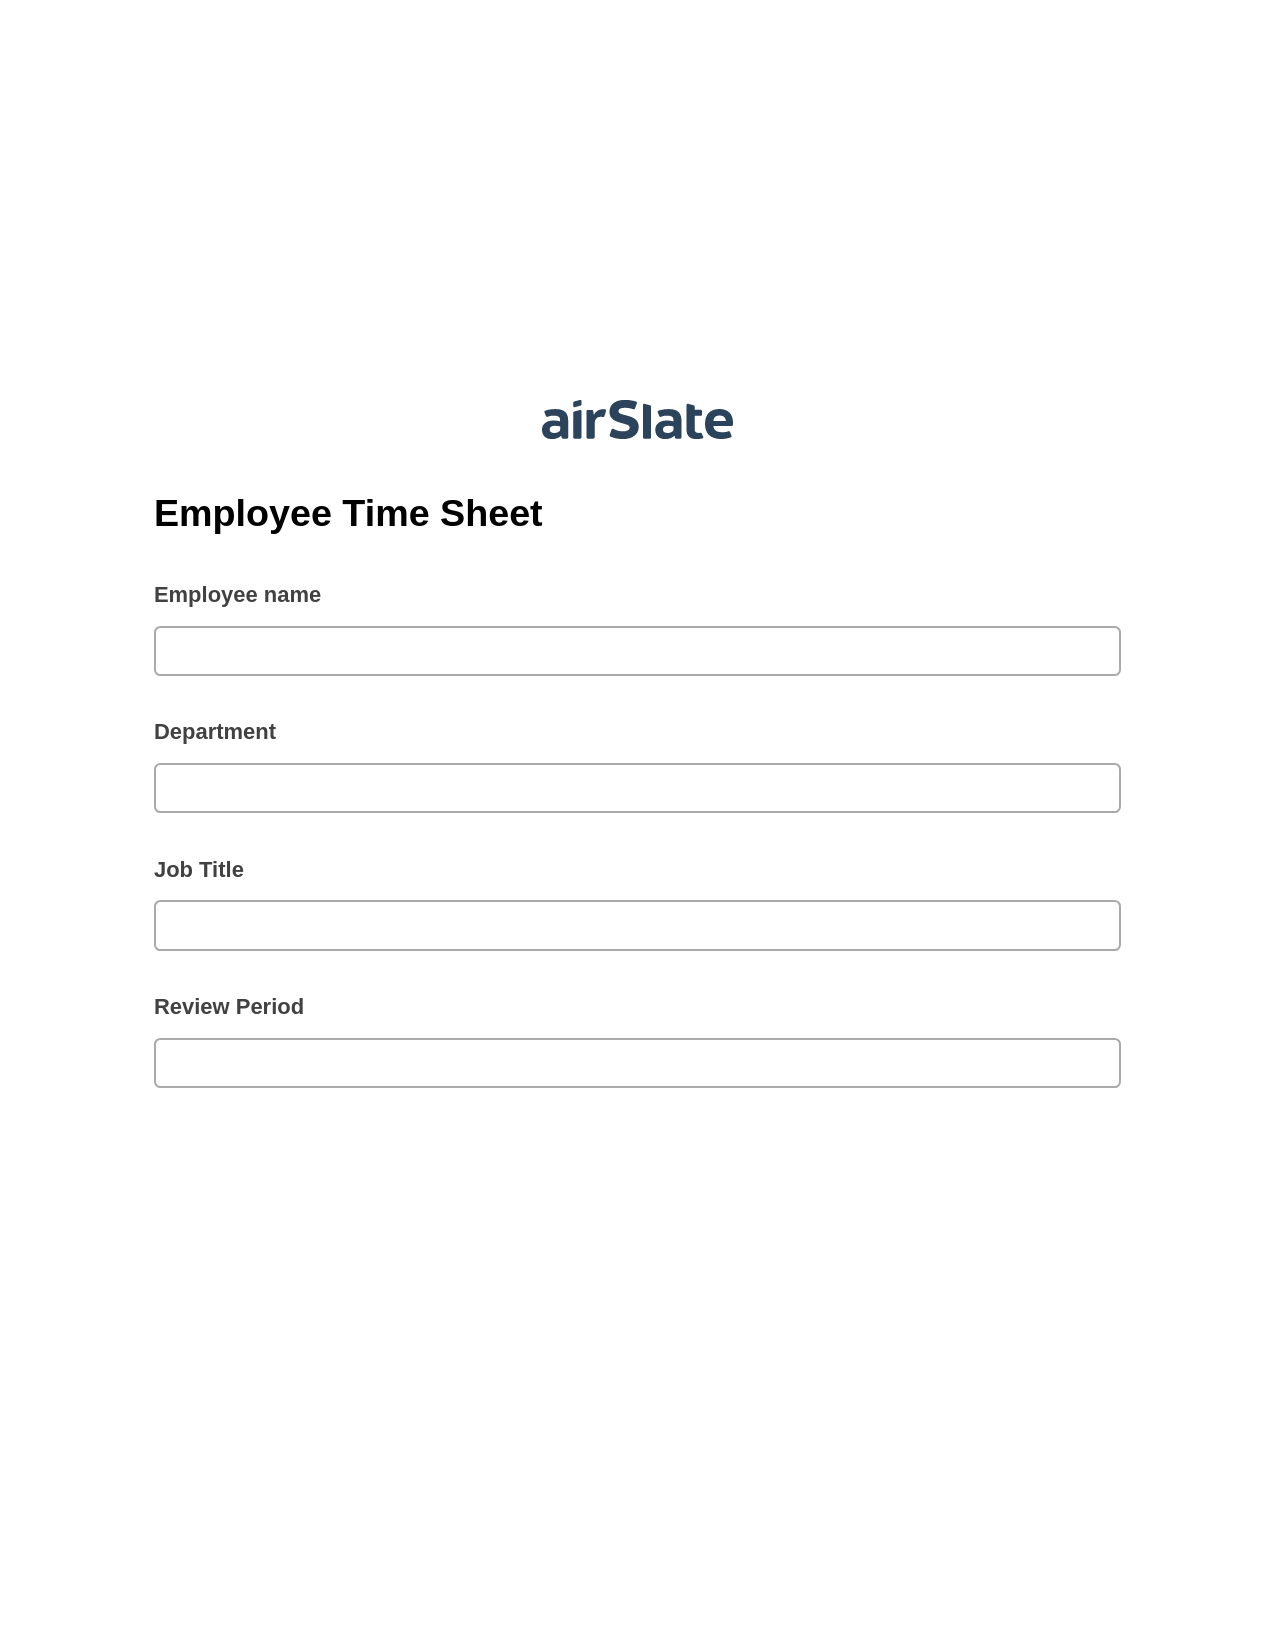 Multirole Employee Time Sheet Pre-fill from Google Sheets Bot, Create Salesforce Records Bot, Archive to Dropbox Bot